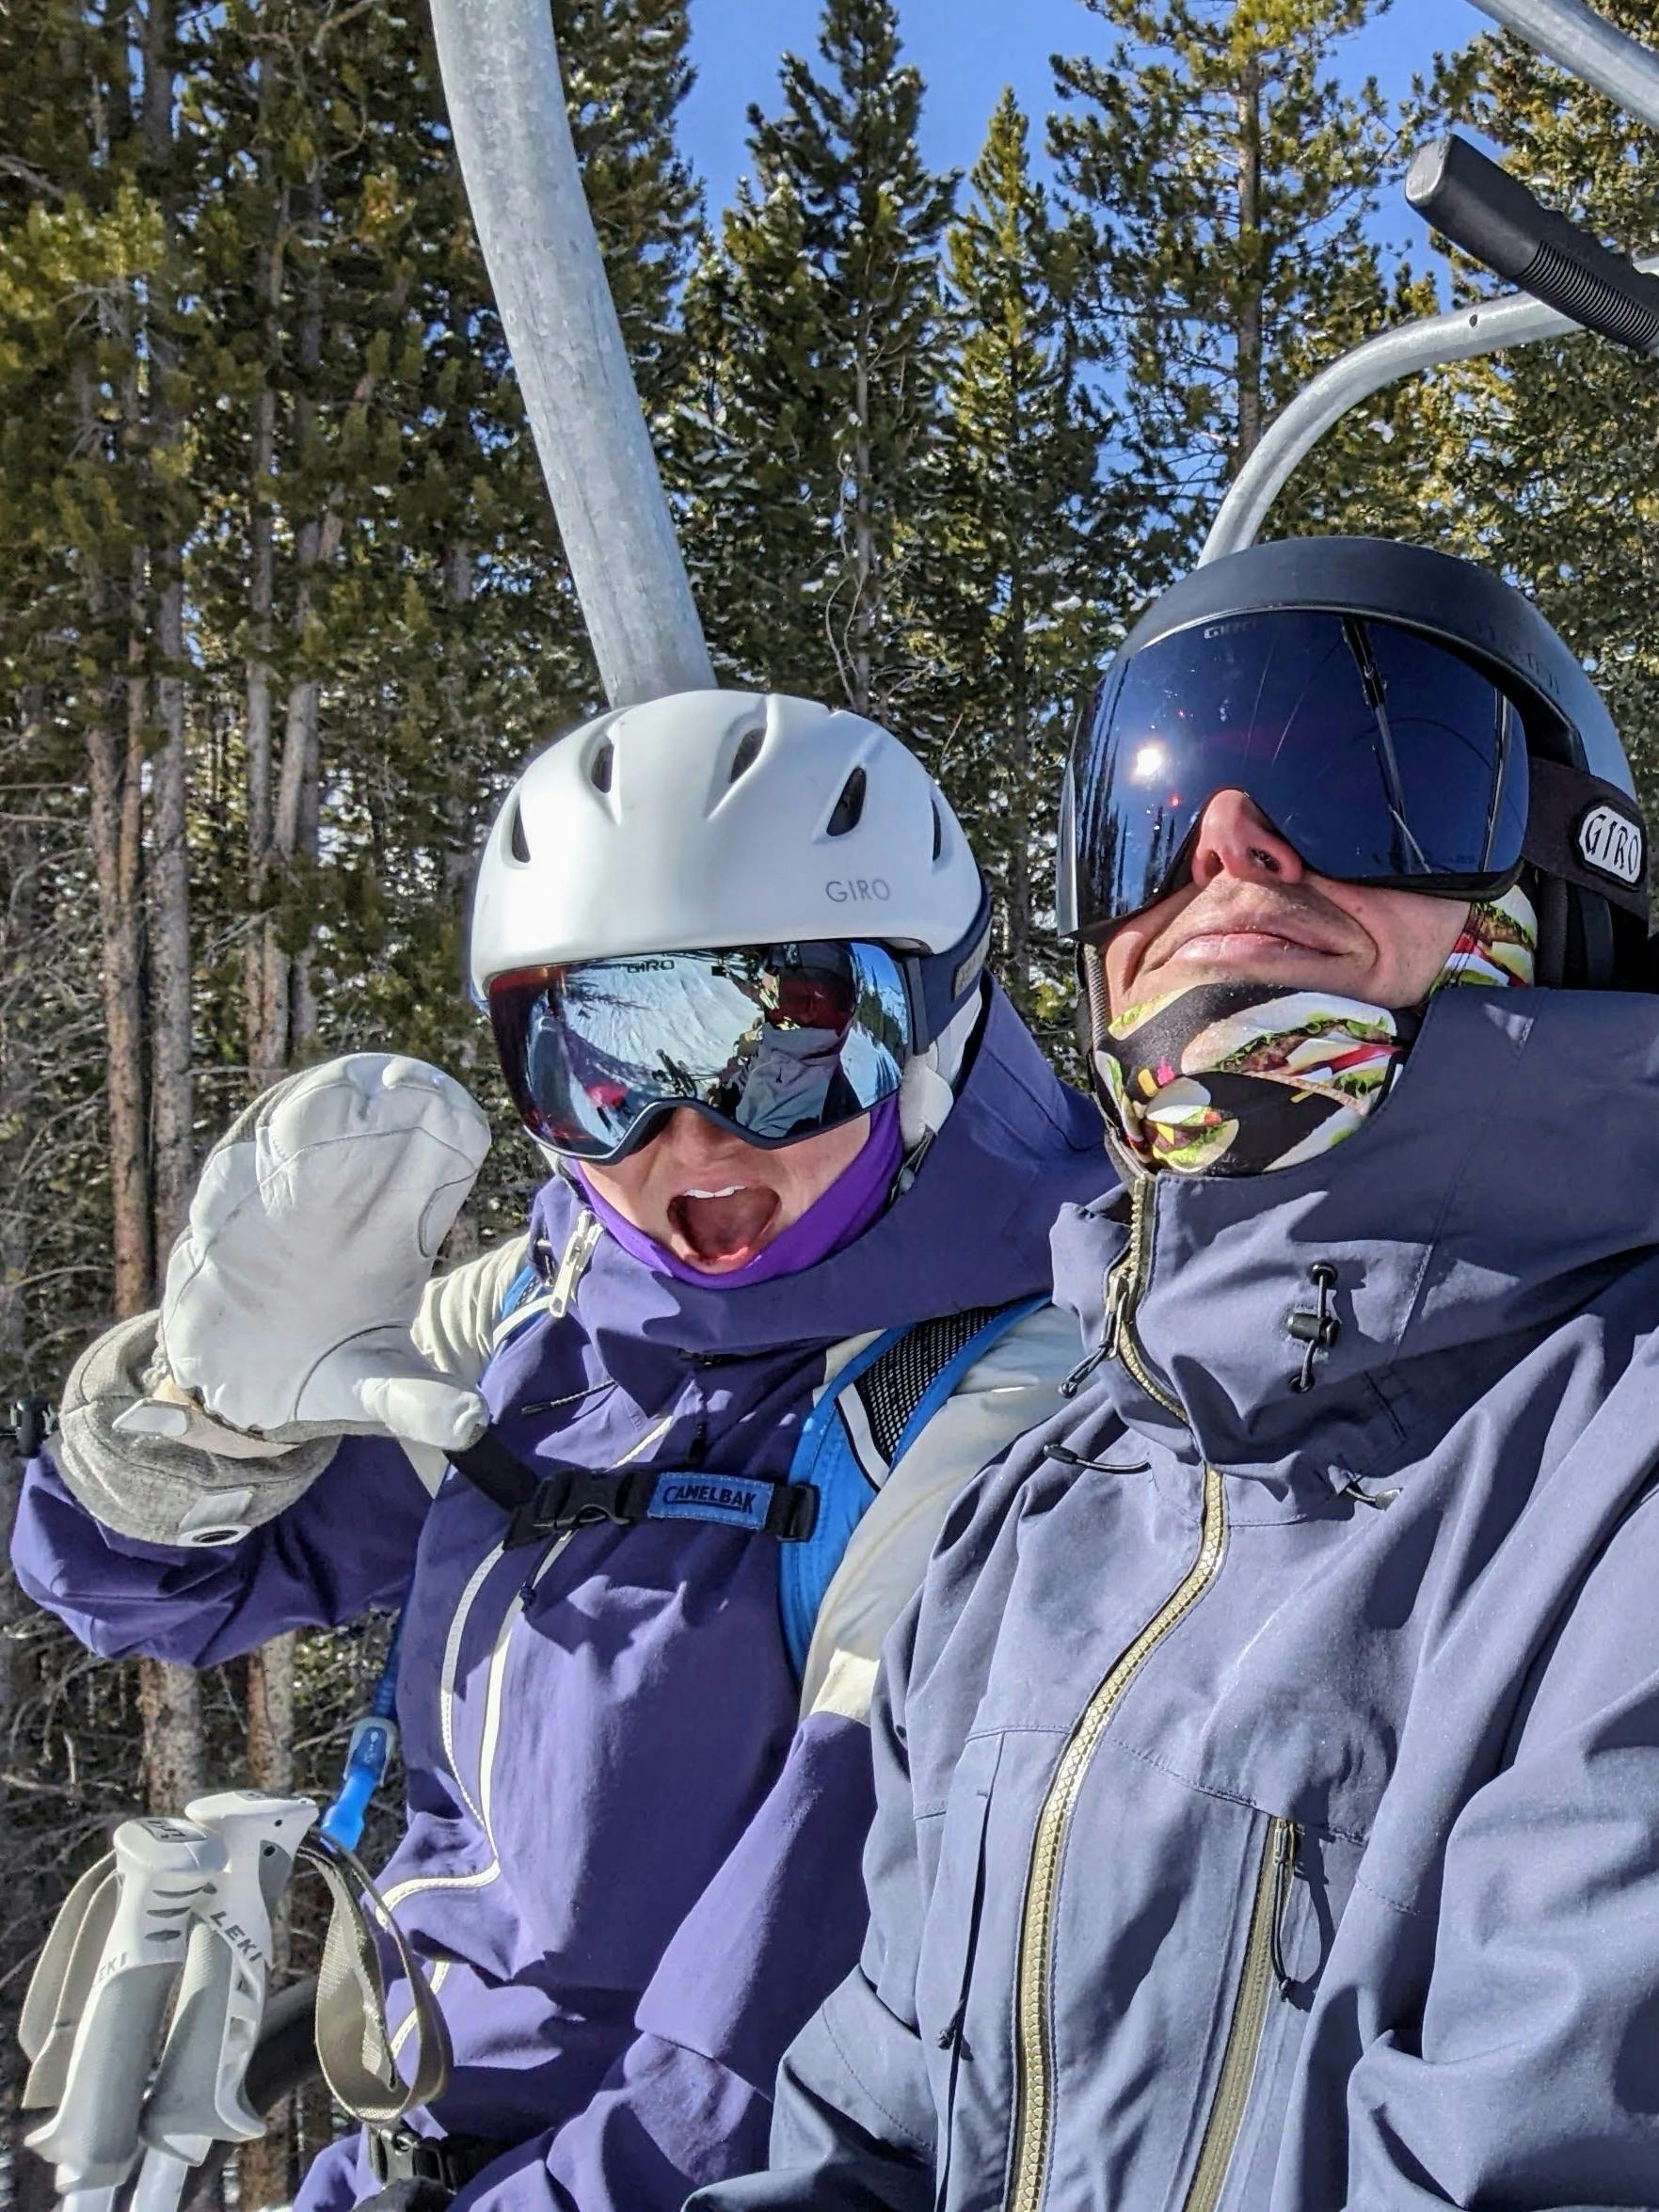 Two skiers on a chairlift. 